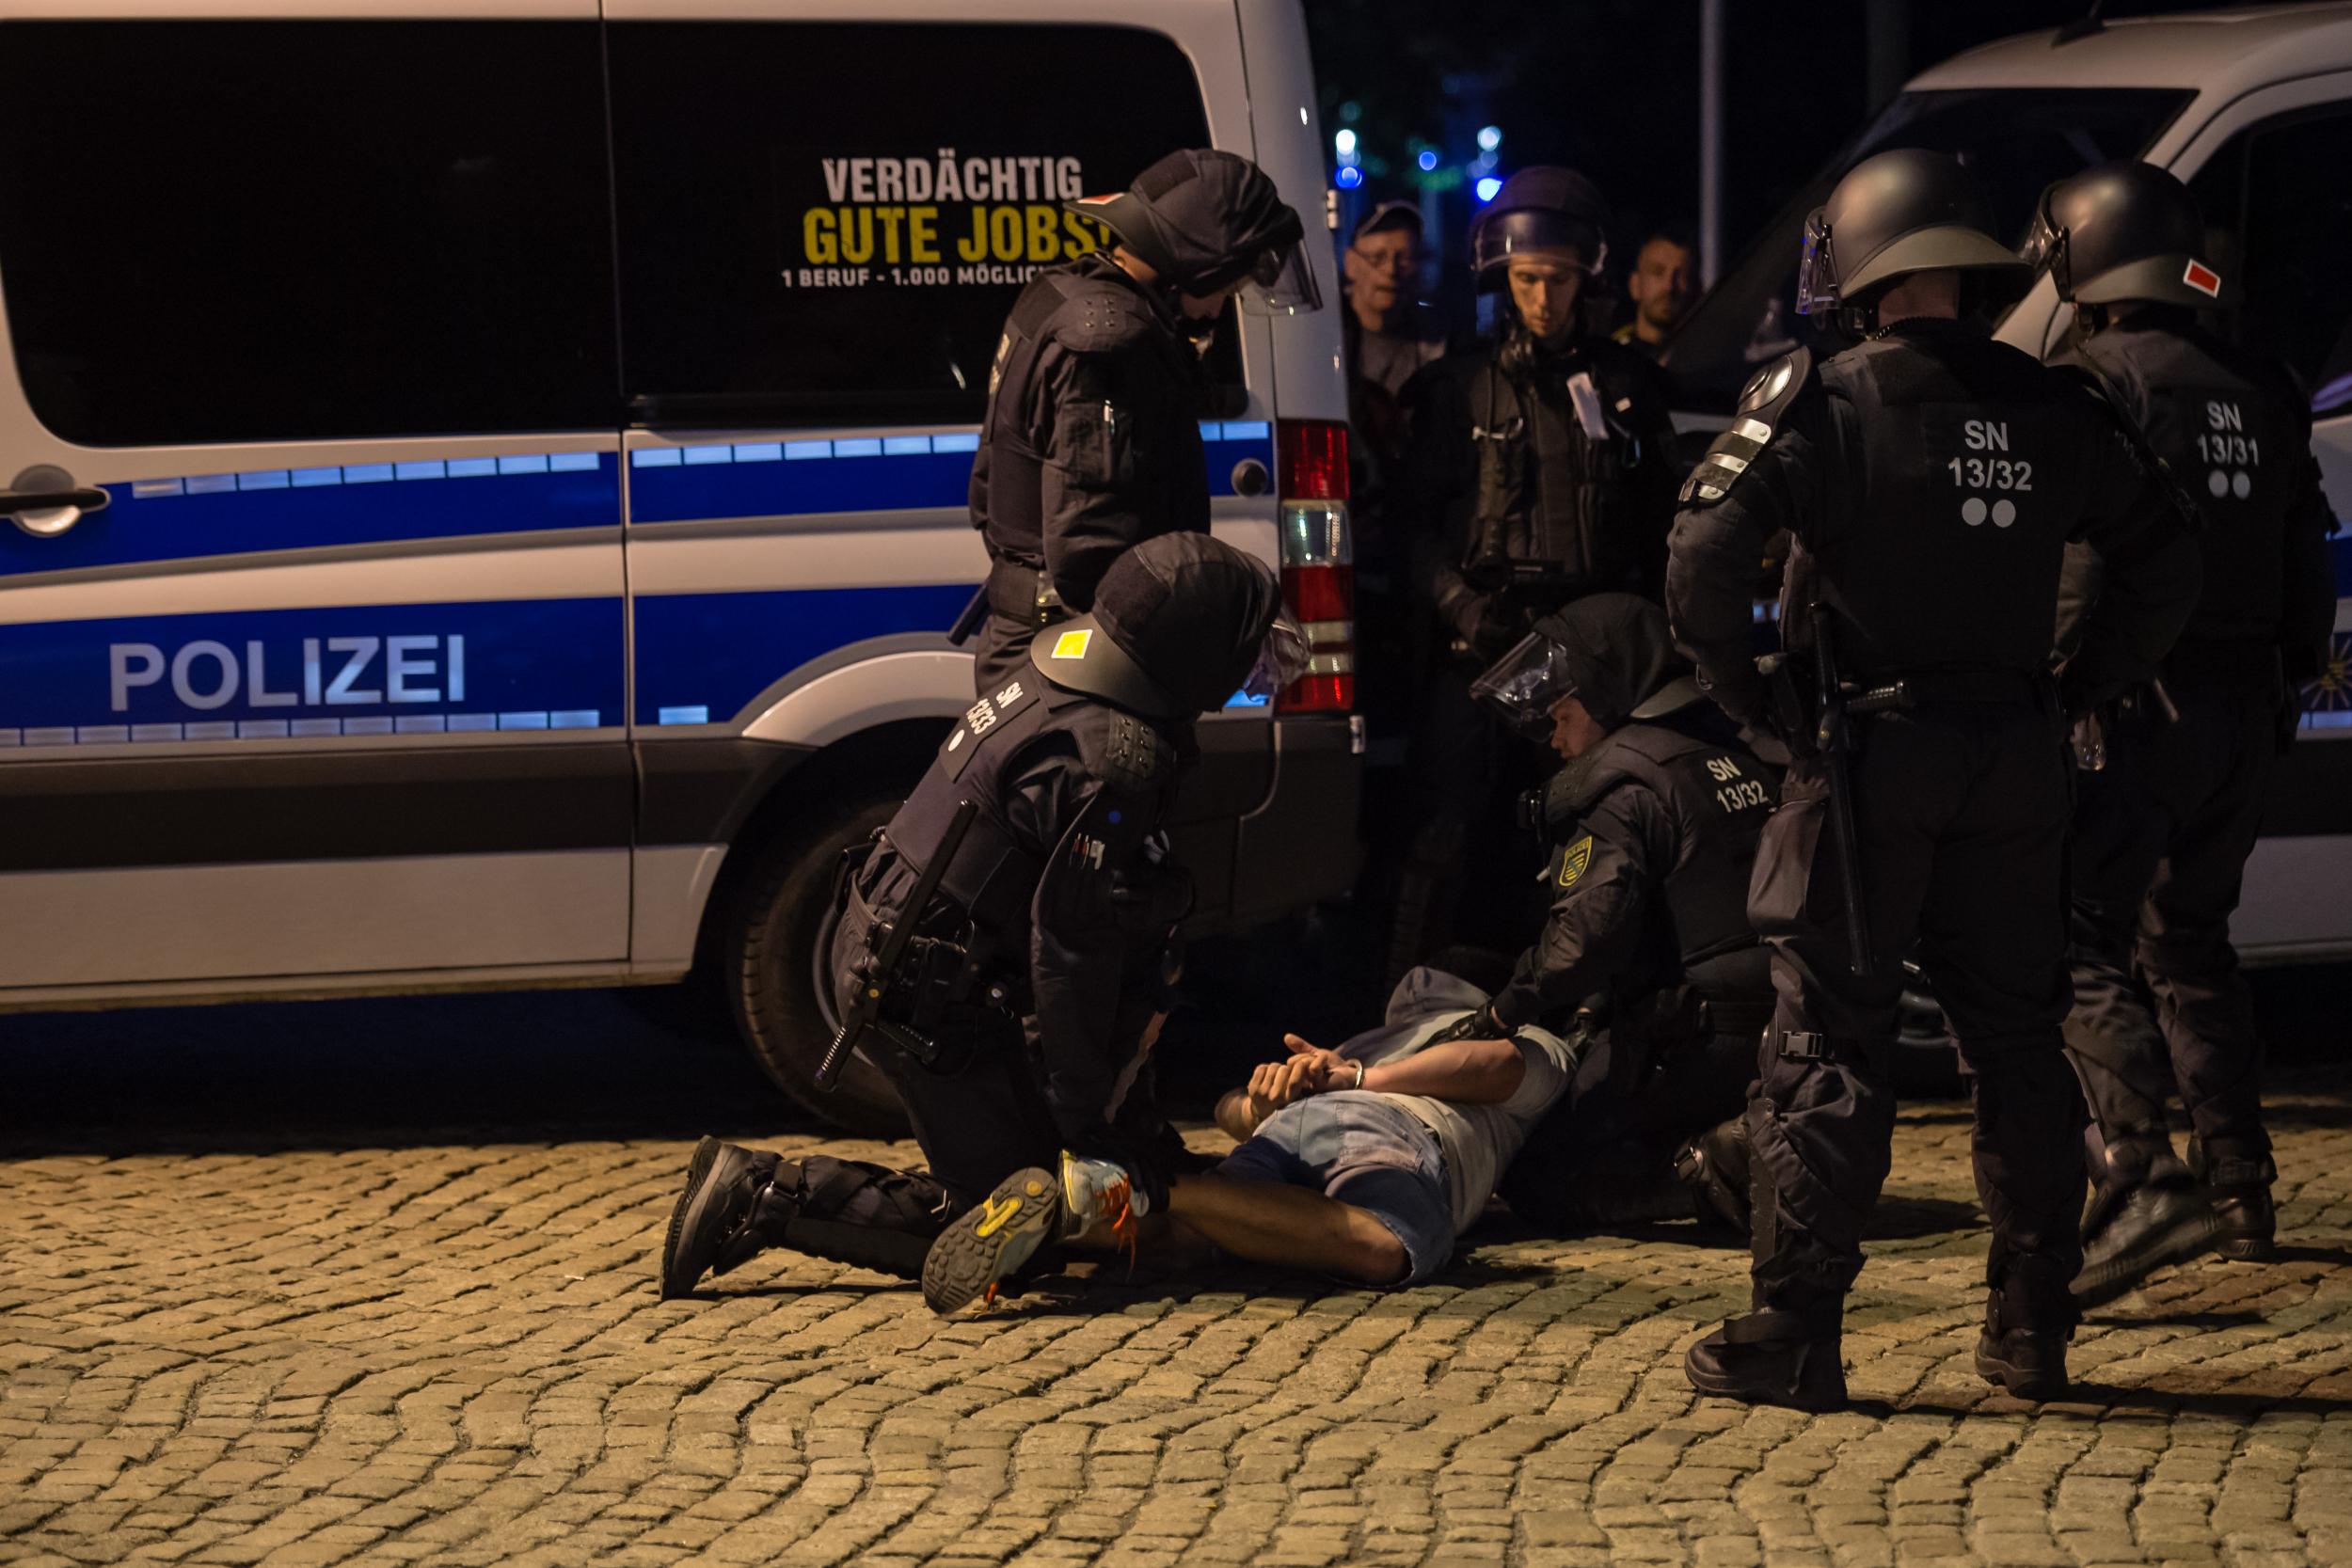 Riot police arrest a man on the verge of a right-wing march after the police closed the march following a blockade of counter-demonstrators on 1 September 2018 in Chemnitz.